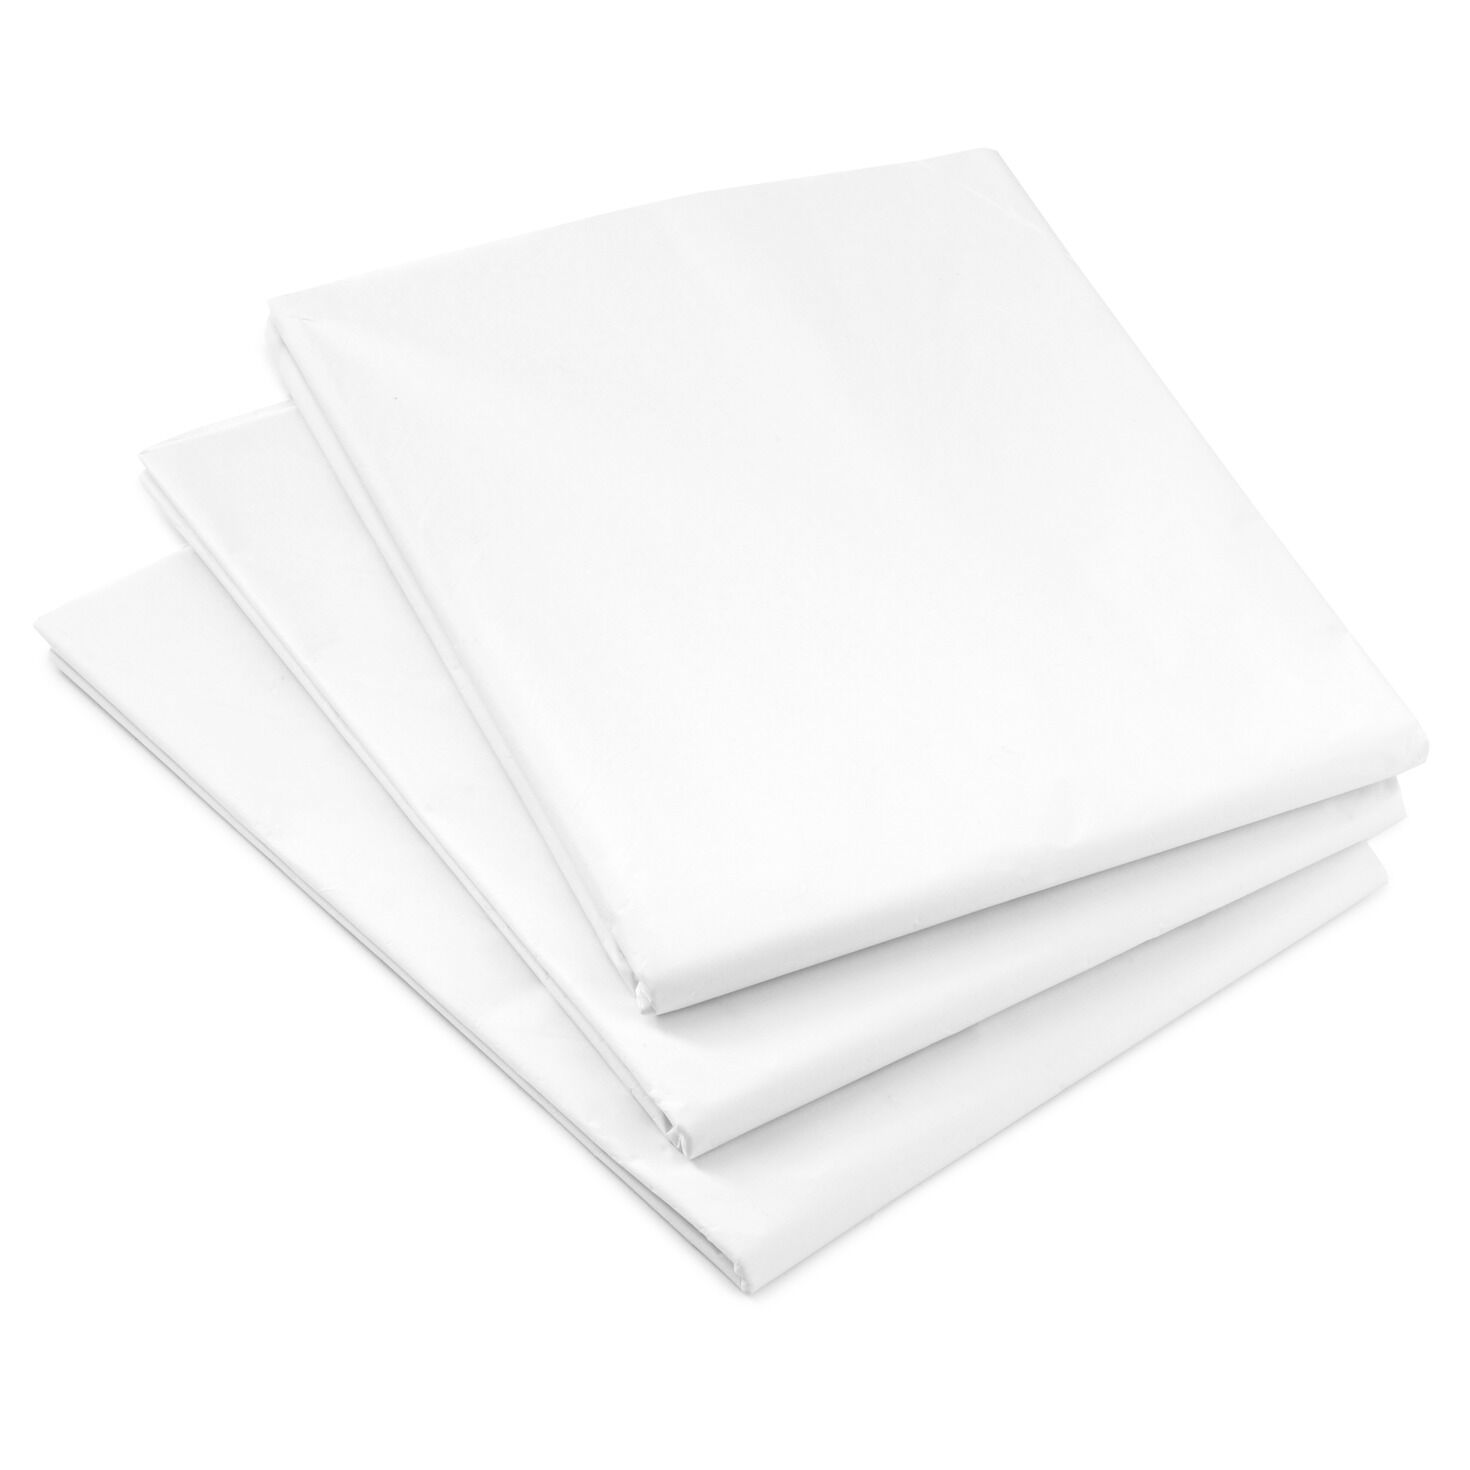 Free Shipping!!! White Tissue Paper 480 Sheets 